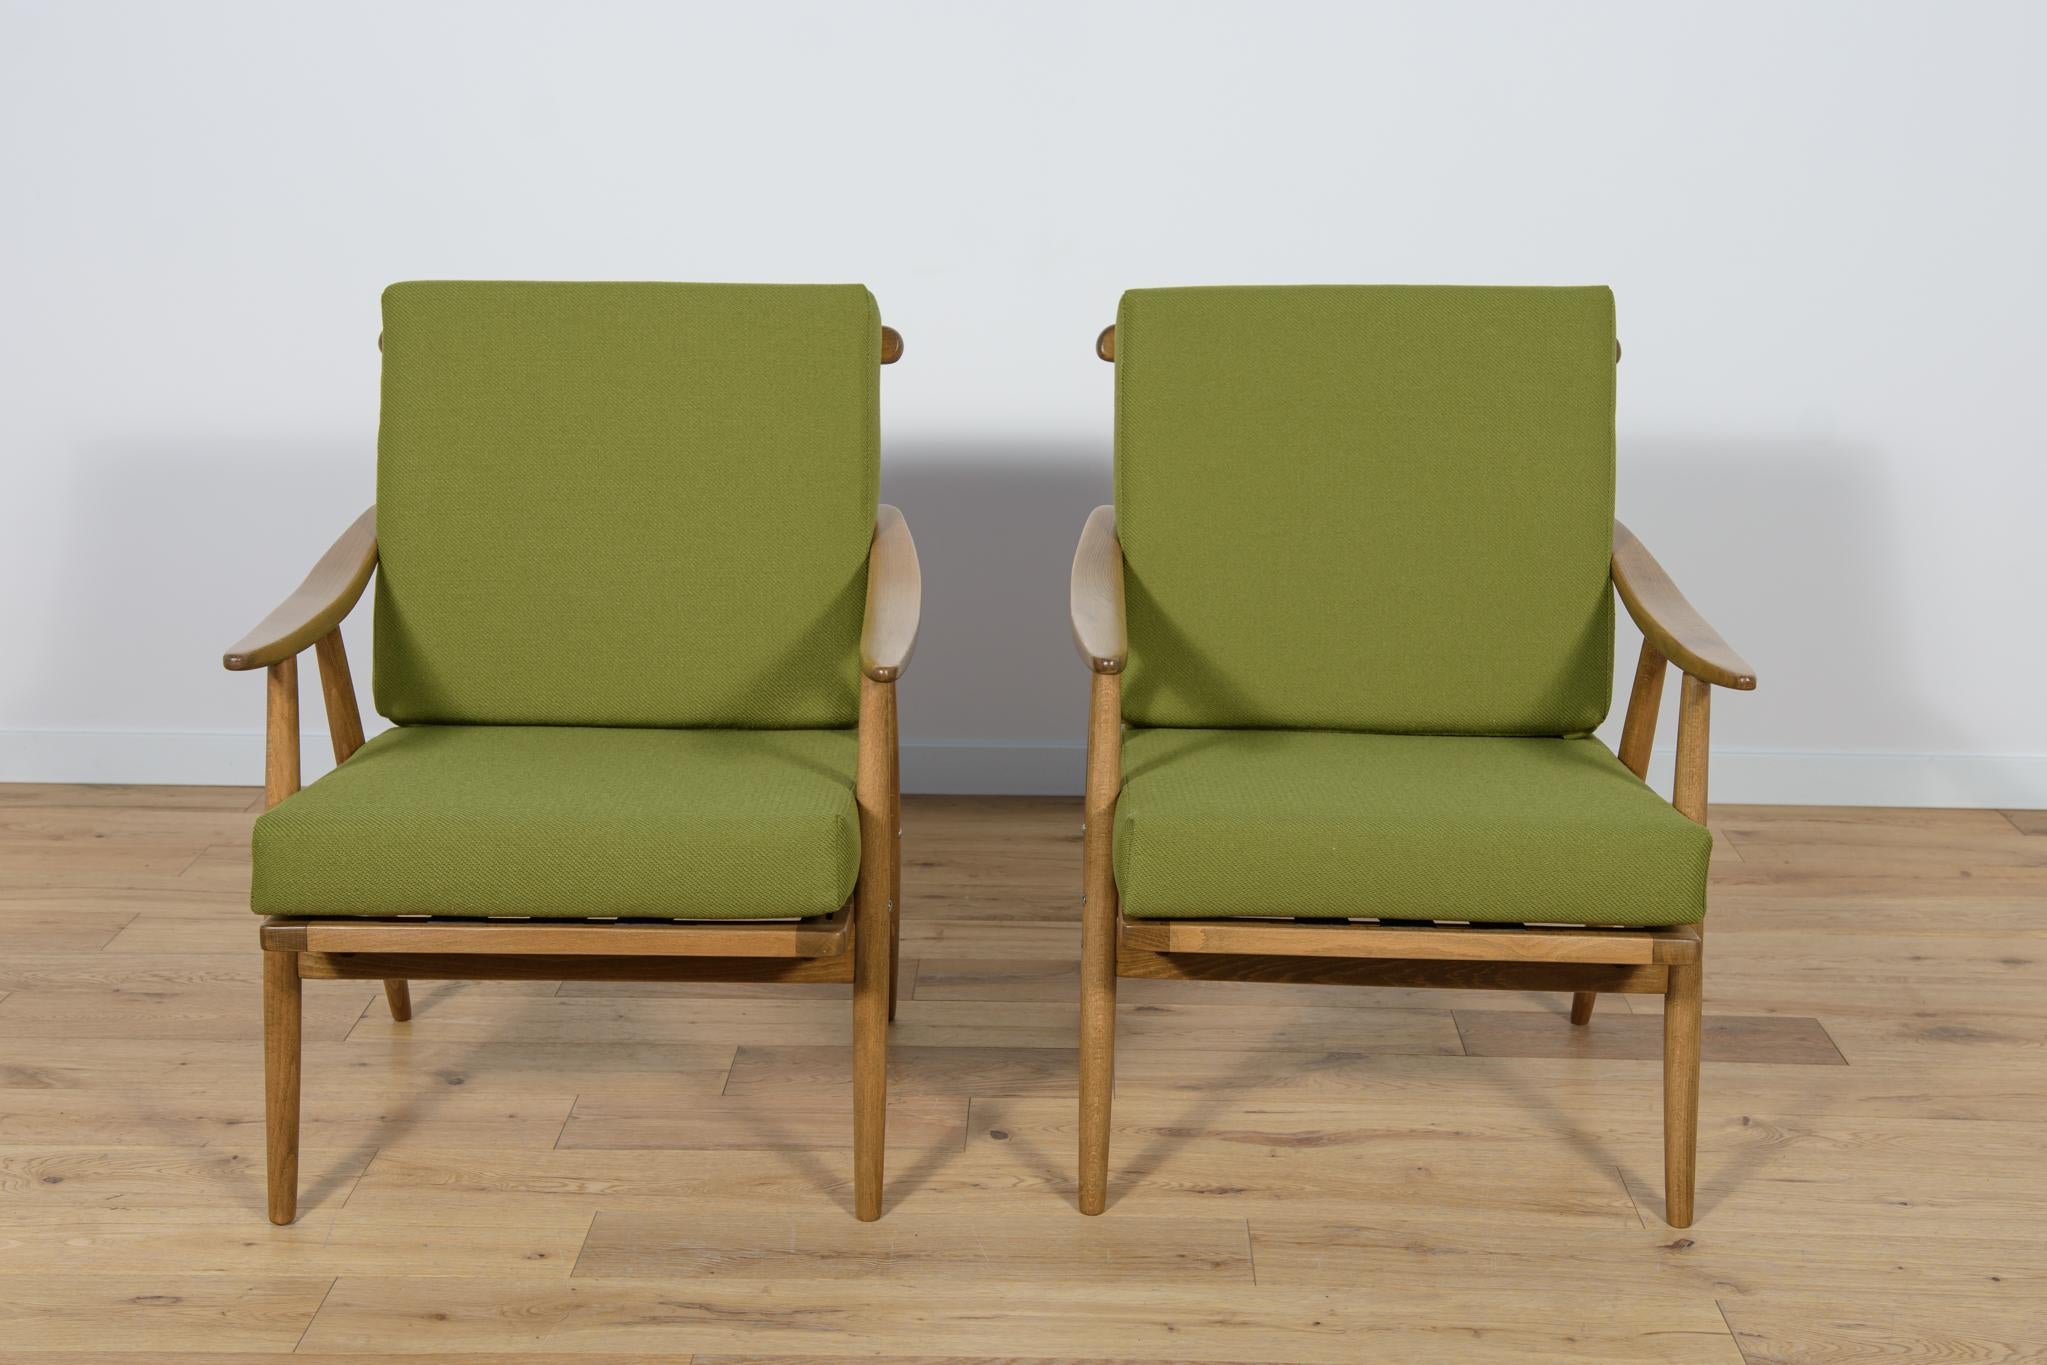 This pair of armchairs was produced by the Czechoslovak company TON in the 1960s. The beech elements have been cleaned from the old surface and painted in a walnut stain and finished with a strong semi matt lacquer. The pillows have been replaced